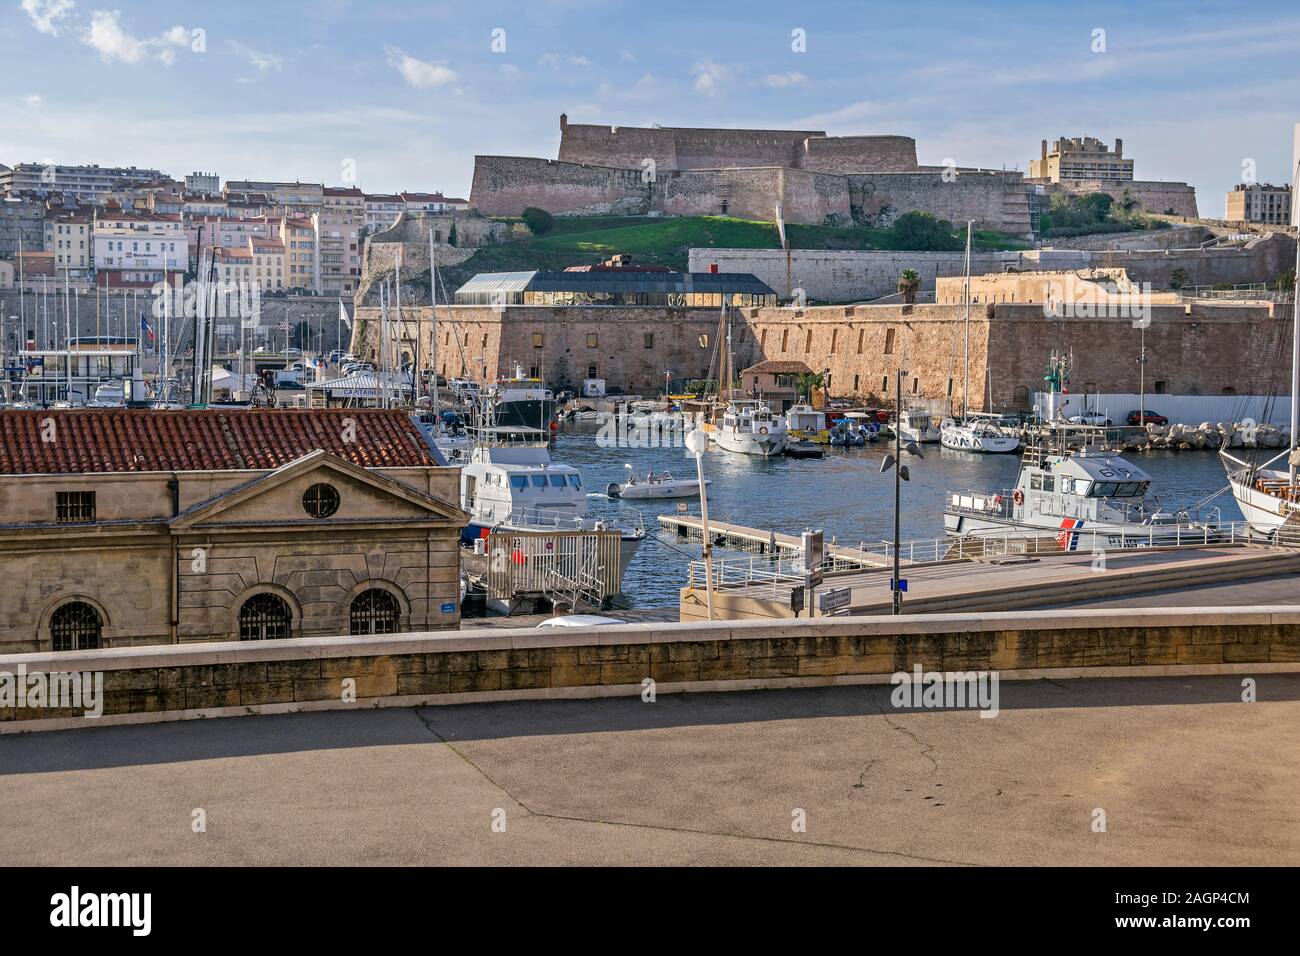 Marseille, France - November 1, 2019: View from the Vaudoyer Sreet at the Old Port with all kinds of boats and Fort Saint-Nicolas built on Louis XIV’s Stock Photo